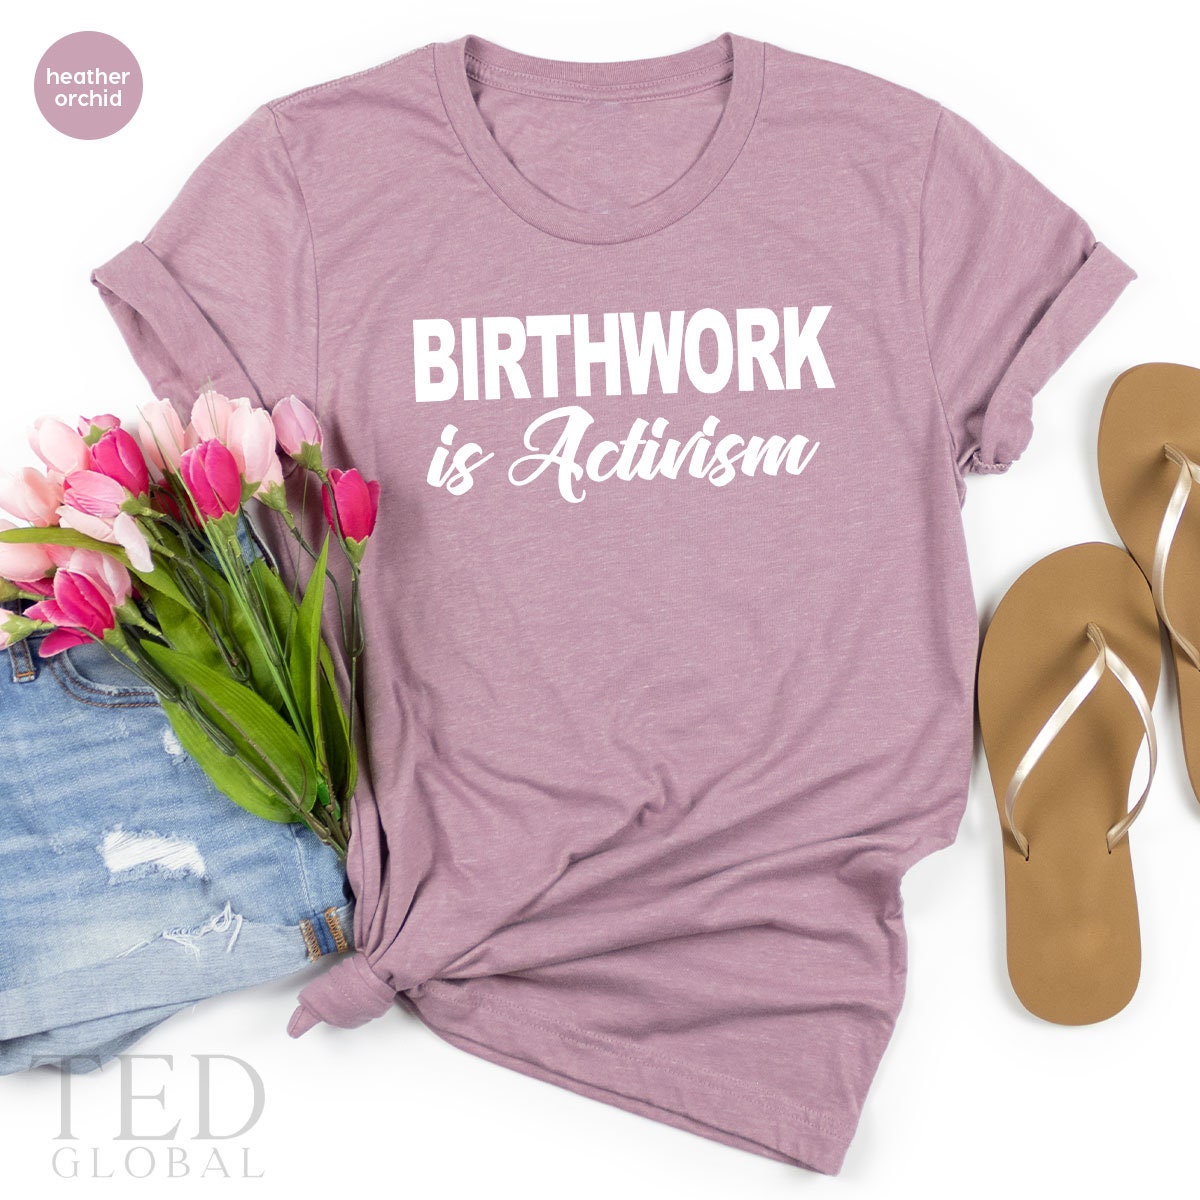 Midwife Shirt, Birth Worker TShirt, Doula Gift, Birthwork Is Activism Shirt, Midwife Student T-Shirt, Midlife Life Tee, Midwifery T Shirt - Fastdeliverytees.com